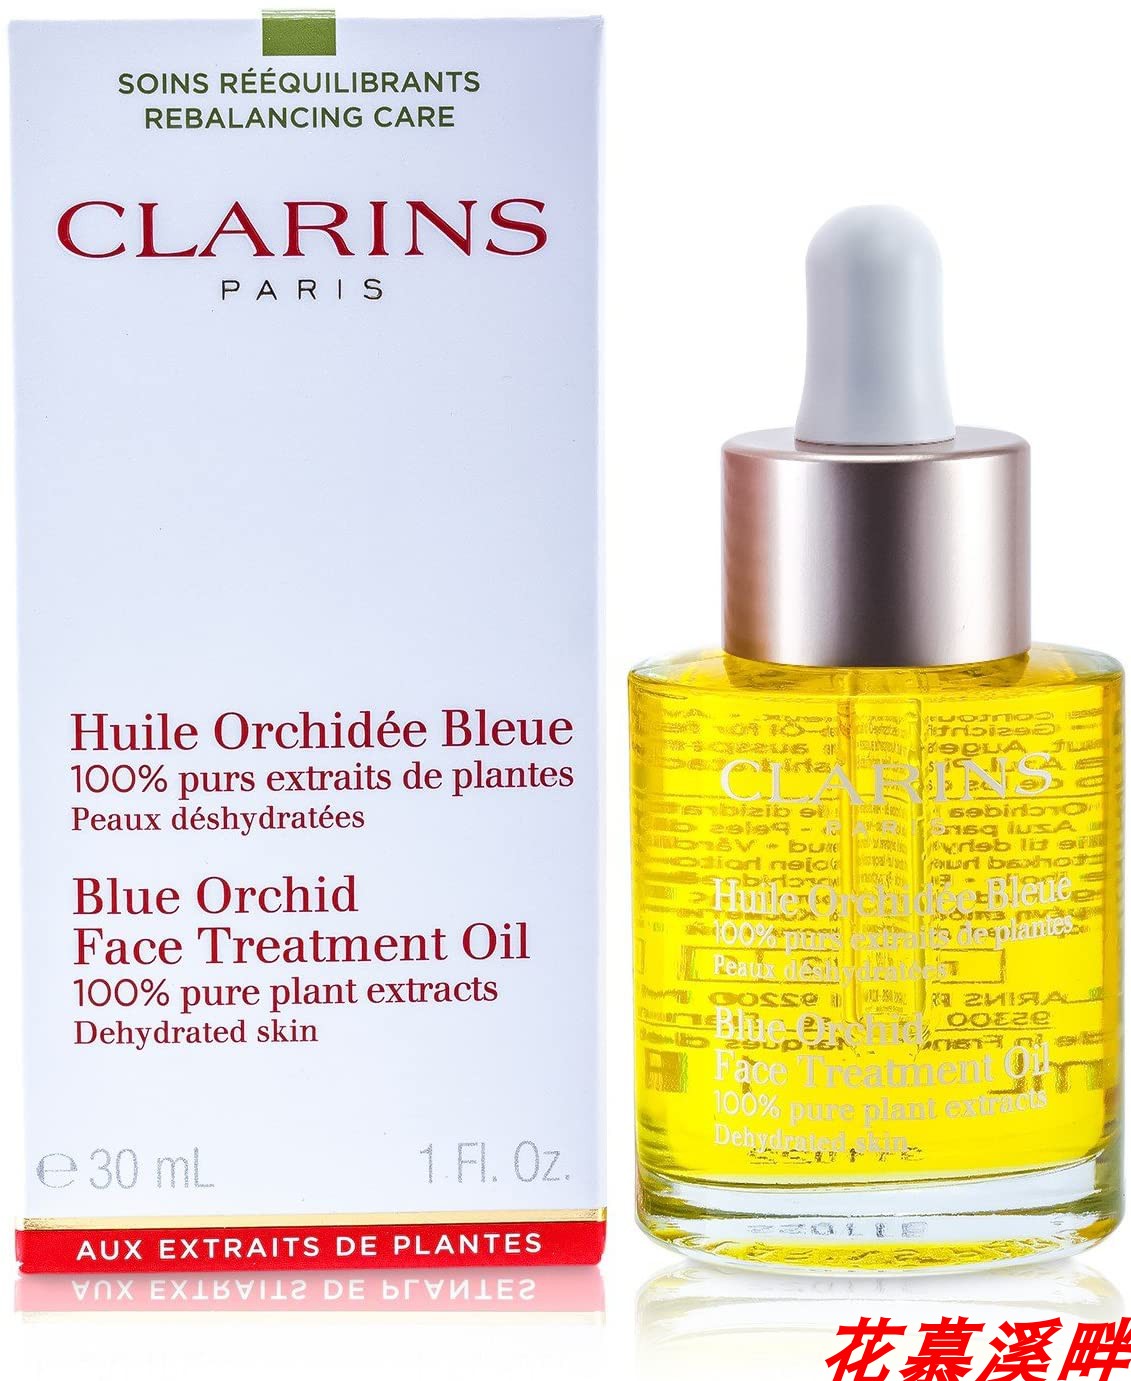 Clarins Blue Orchid Treatment Oil Dehydrated Skin 1oz